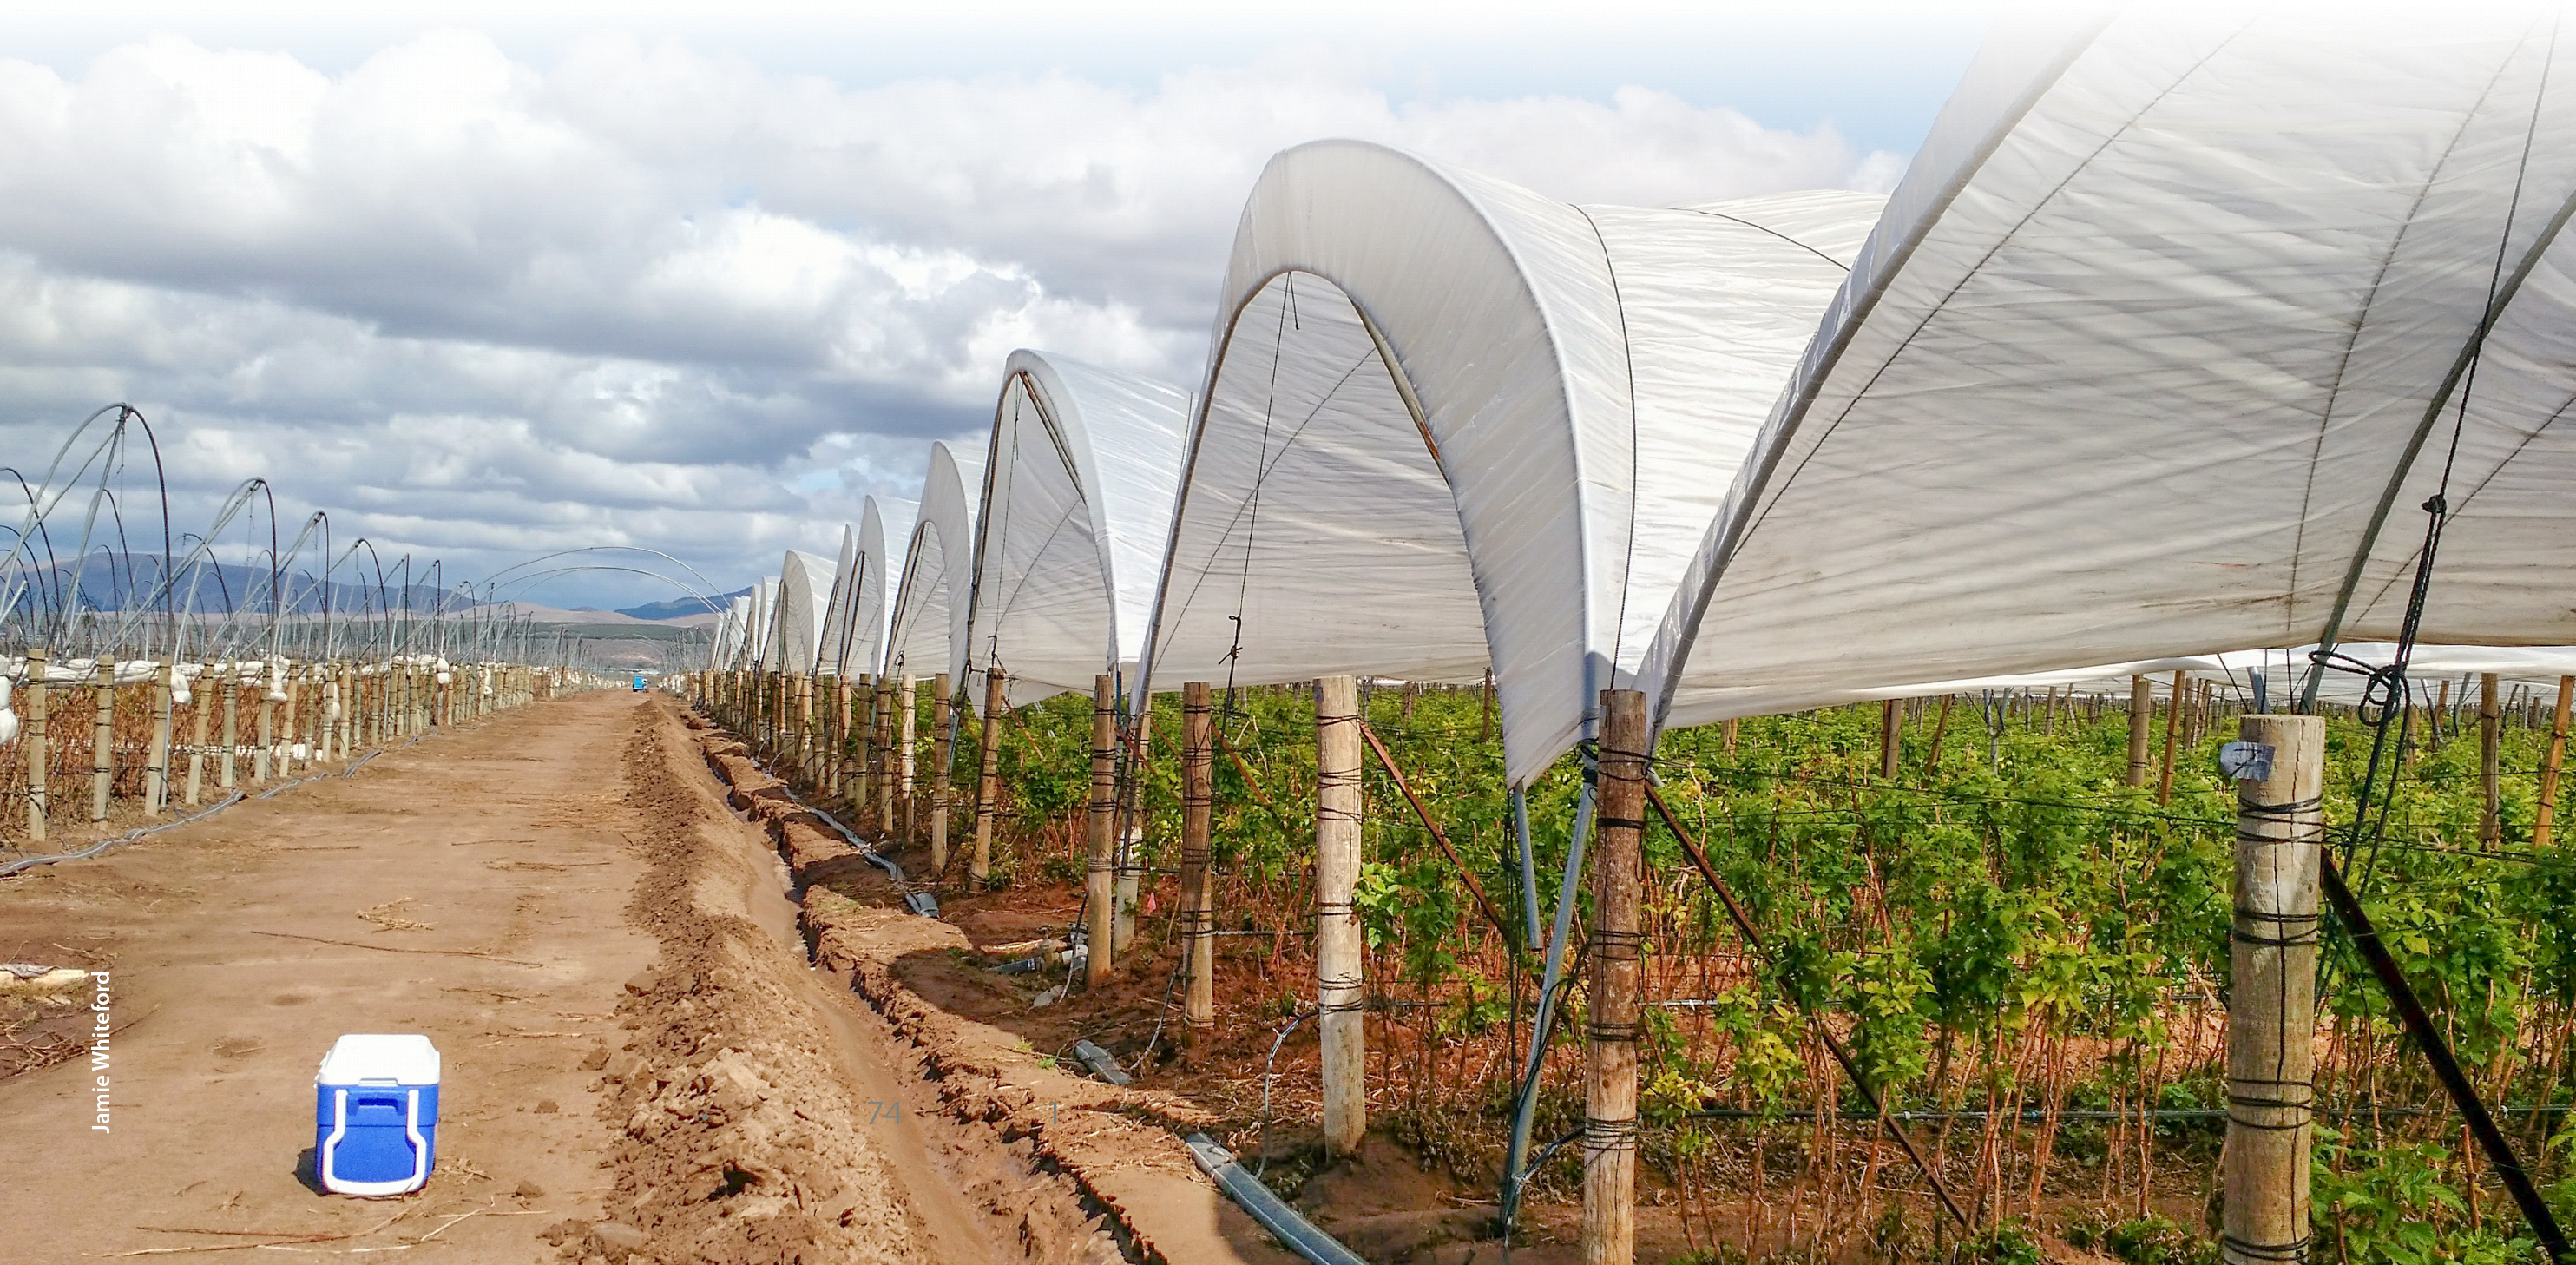 In coastal California, most caneberries, some strawberries, cut flowers, herbs and leafy greens are grown in plastic-covered structures like the ones shown here.